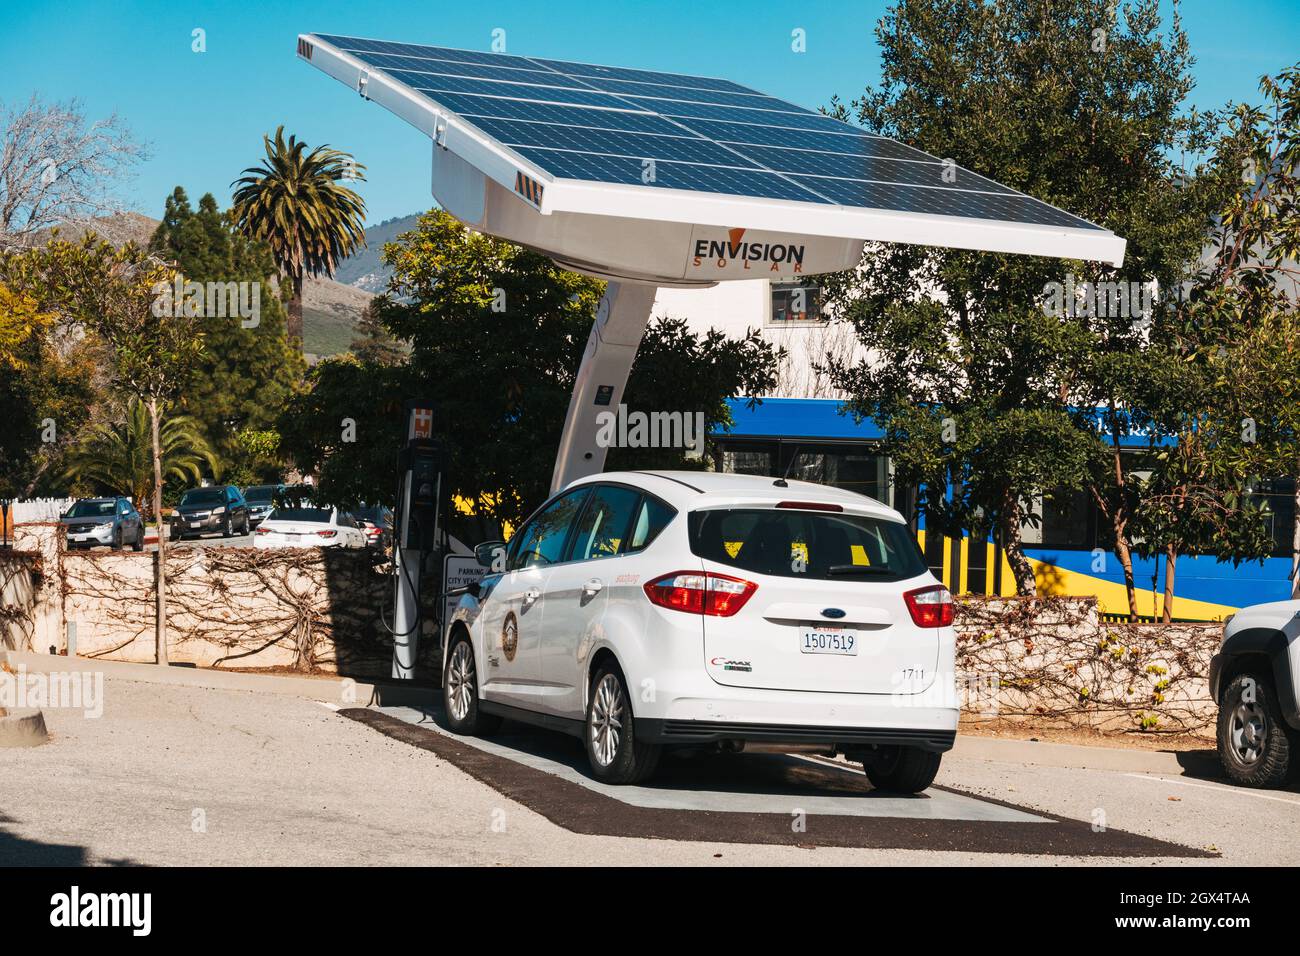 A City of San Luis Obispo municipal electric vehicle recharges its battery from an Envision solar panel Stock Photo